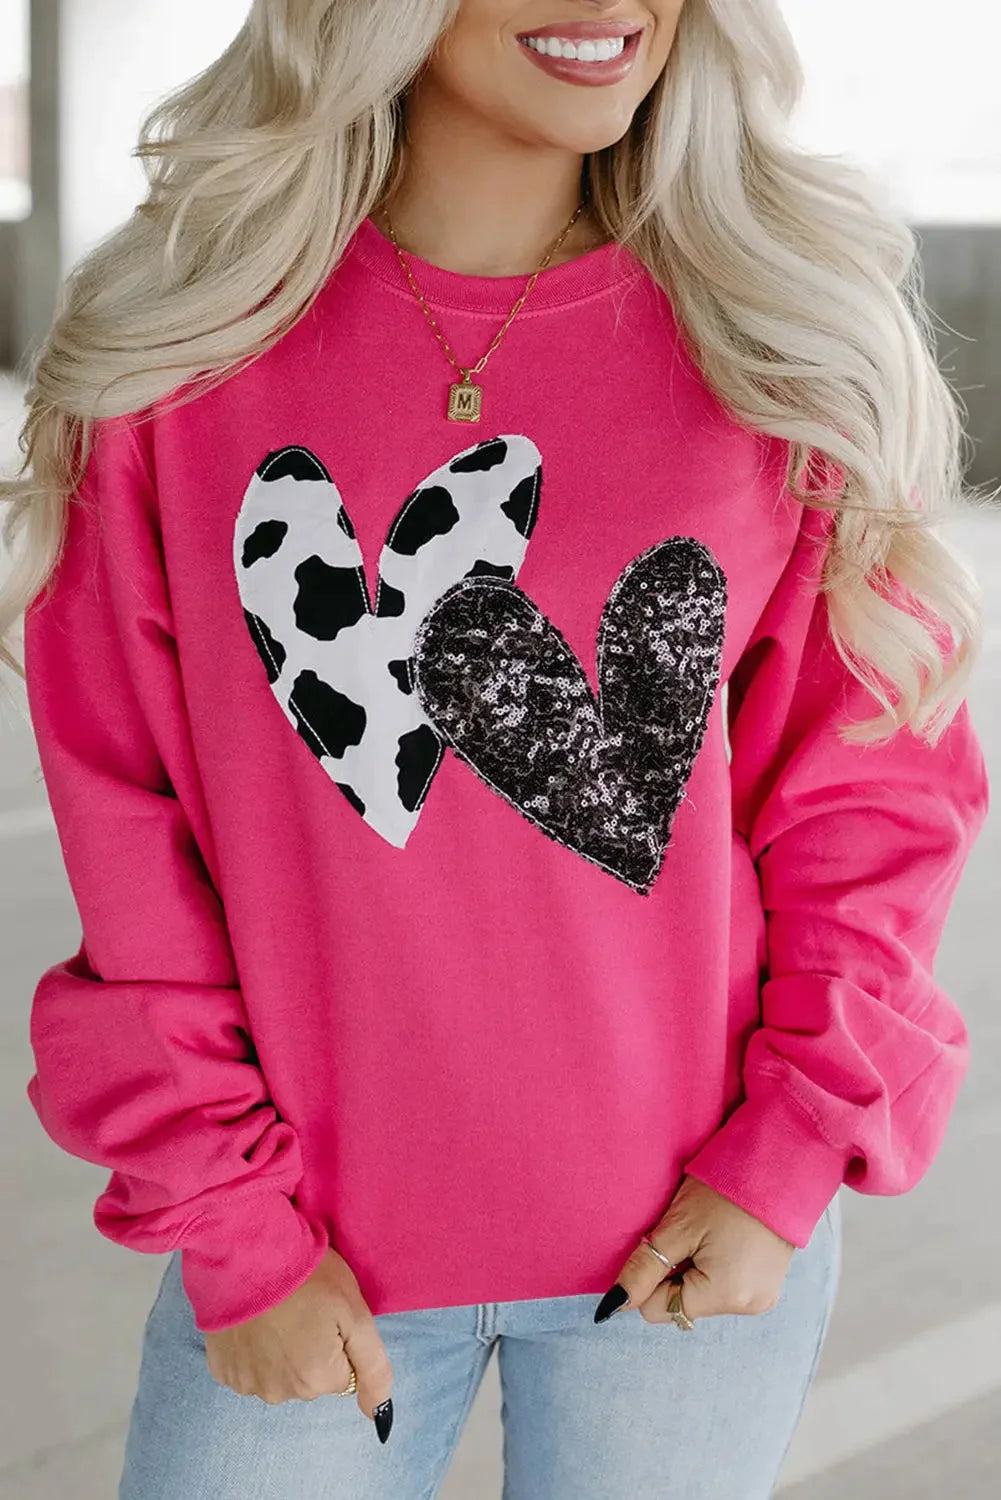 Strawberry pink cow & sequin double heart patch graphic sweatshirt - l / 62.7% polyester + 37.3% cotton - sweatshirts